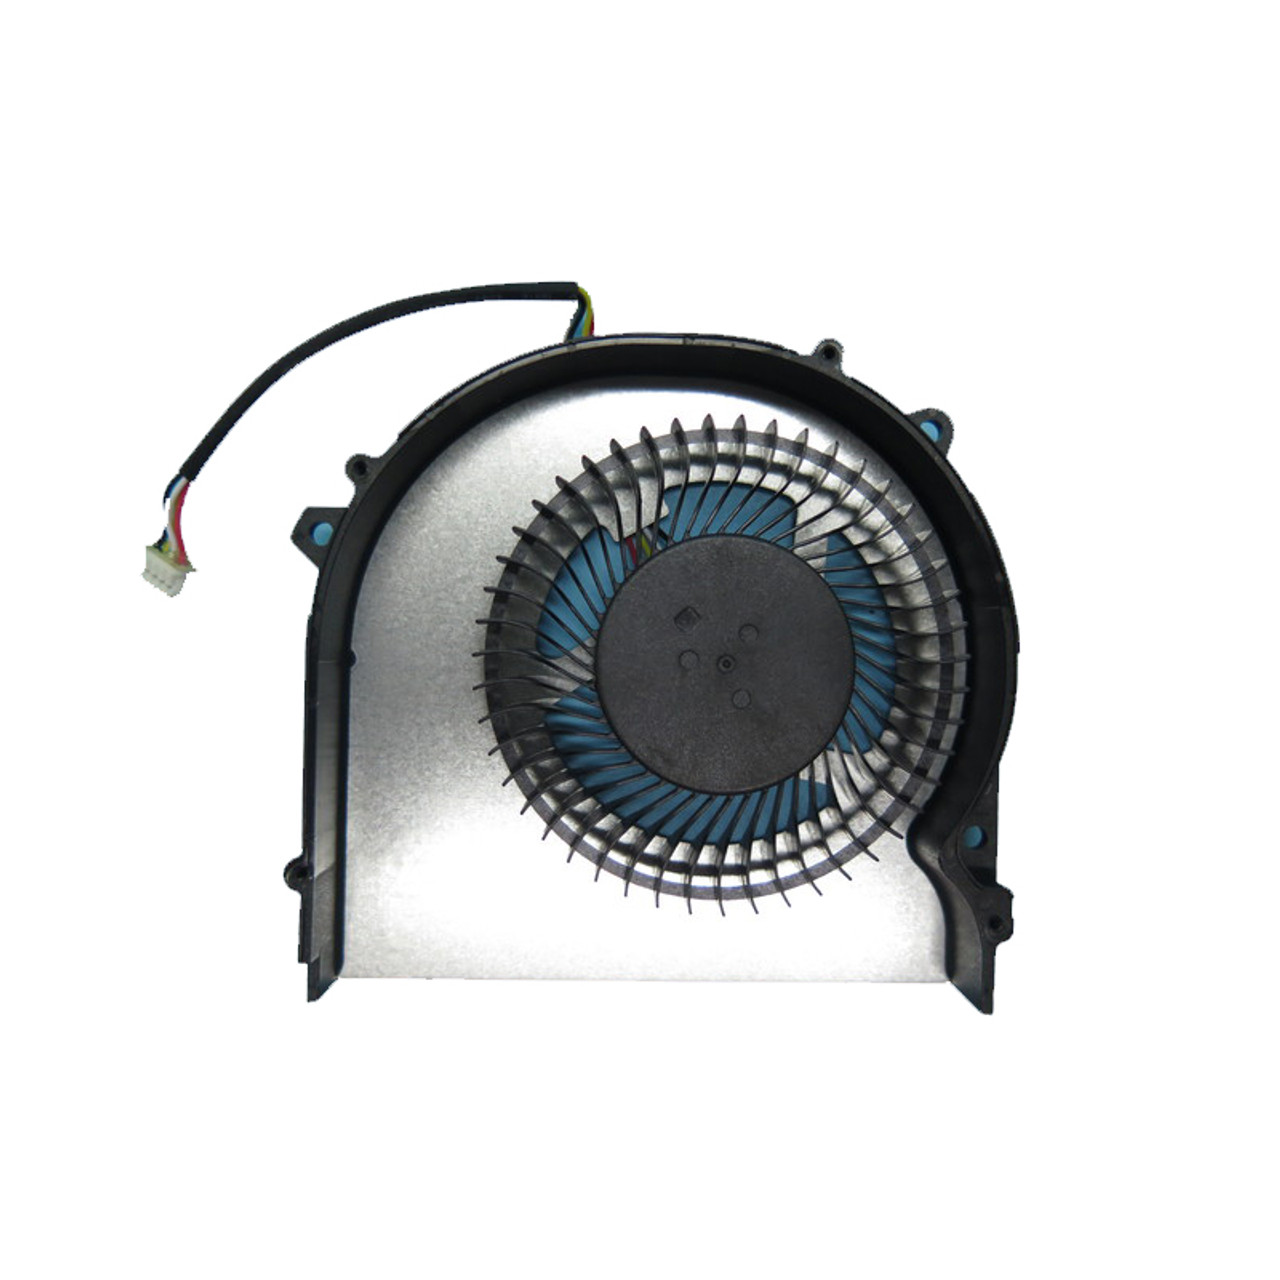 Laptop CPU Fan For Mouse Computer m-Book K700SN-M2S5-KK-B  MB-K700SN-M2S5-KK-B K700SN-M2SH2 MB-K700SN-M2SH2 K700SN-M2SH2-KK  MB-K700SN-M2SH2-KK NH55RGQ ...